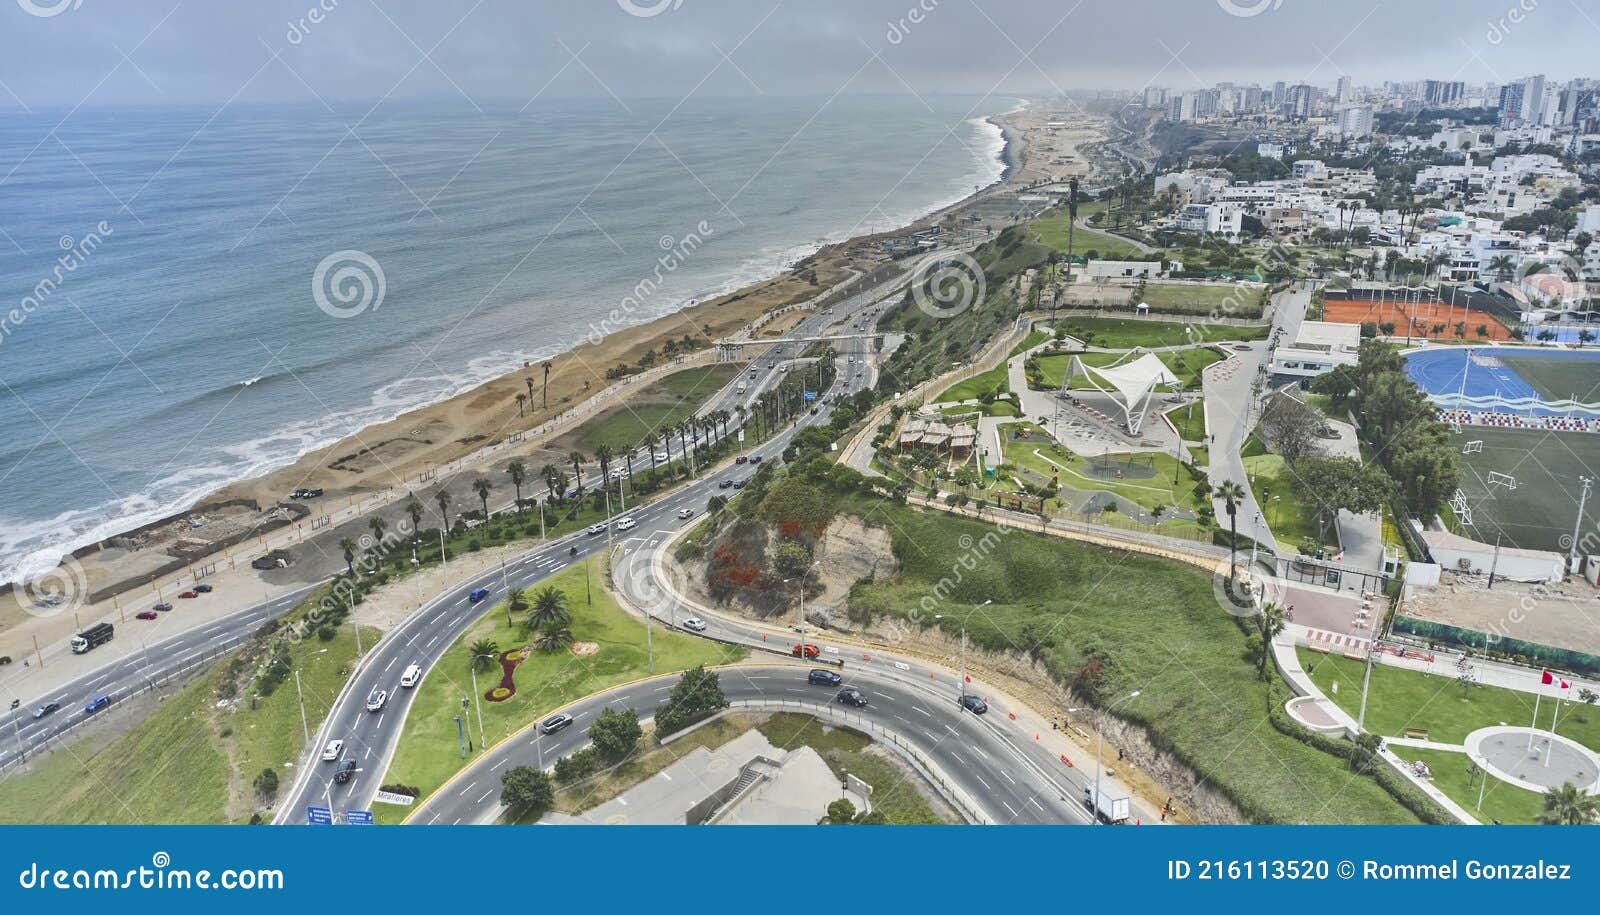 san isidro district bicentennial park in the city of lima, expressway costa verde